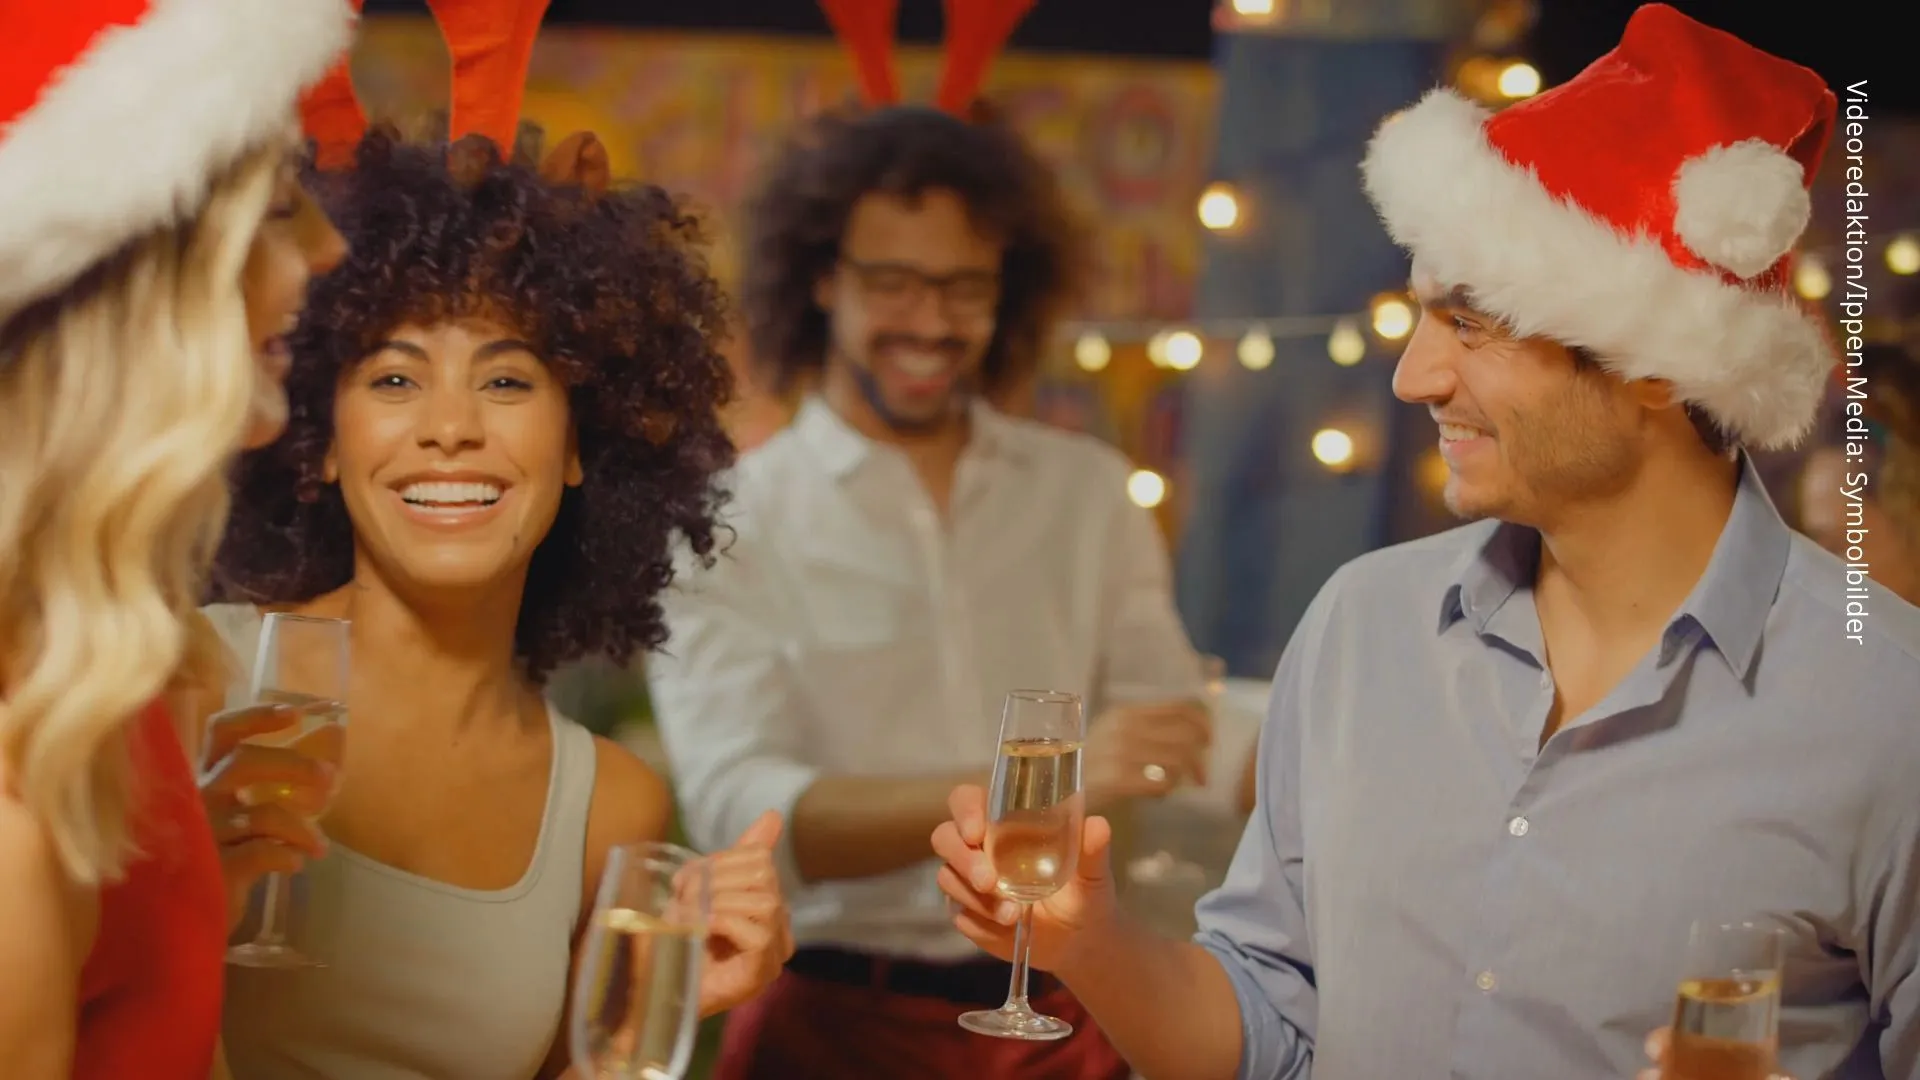 Christmas party among colleagues? Avoid these blunders